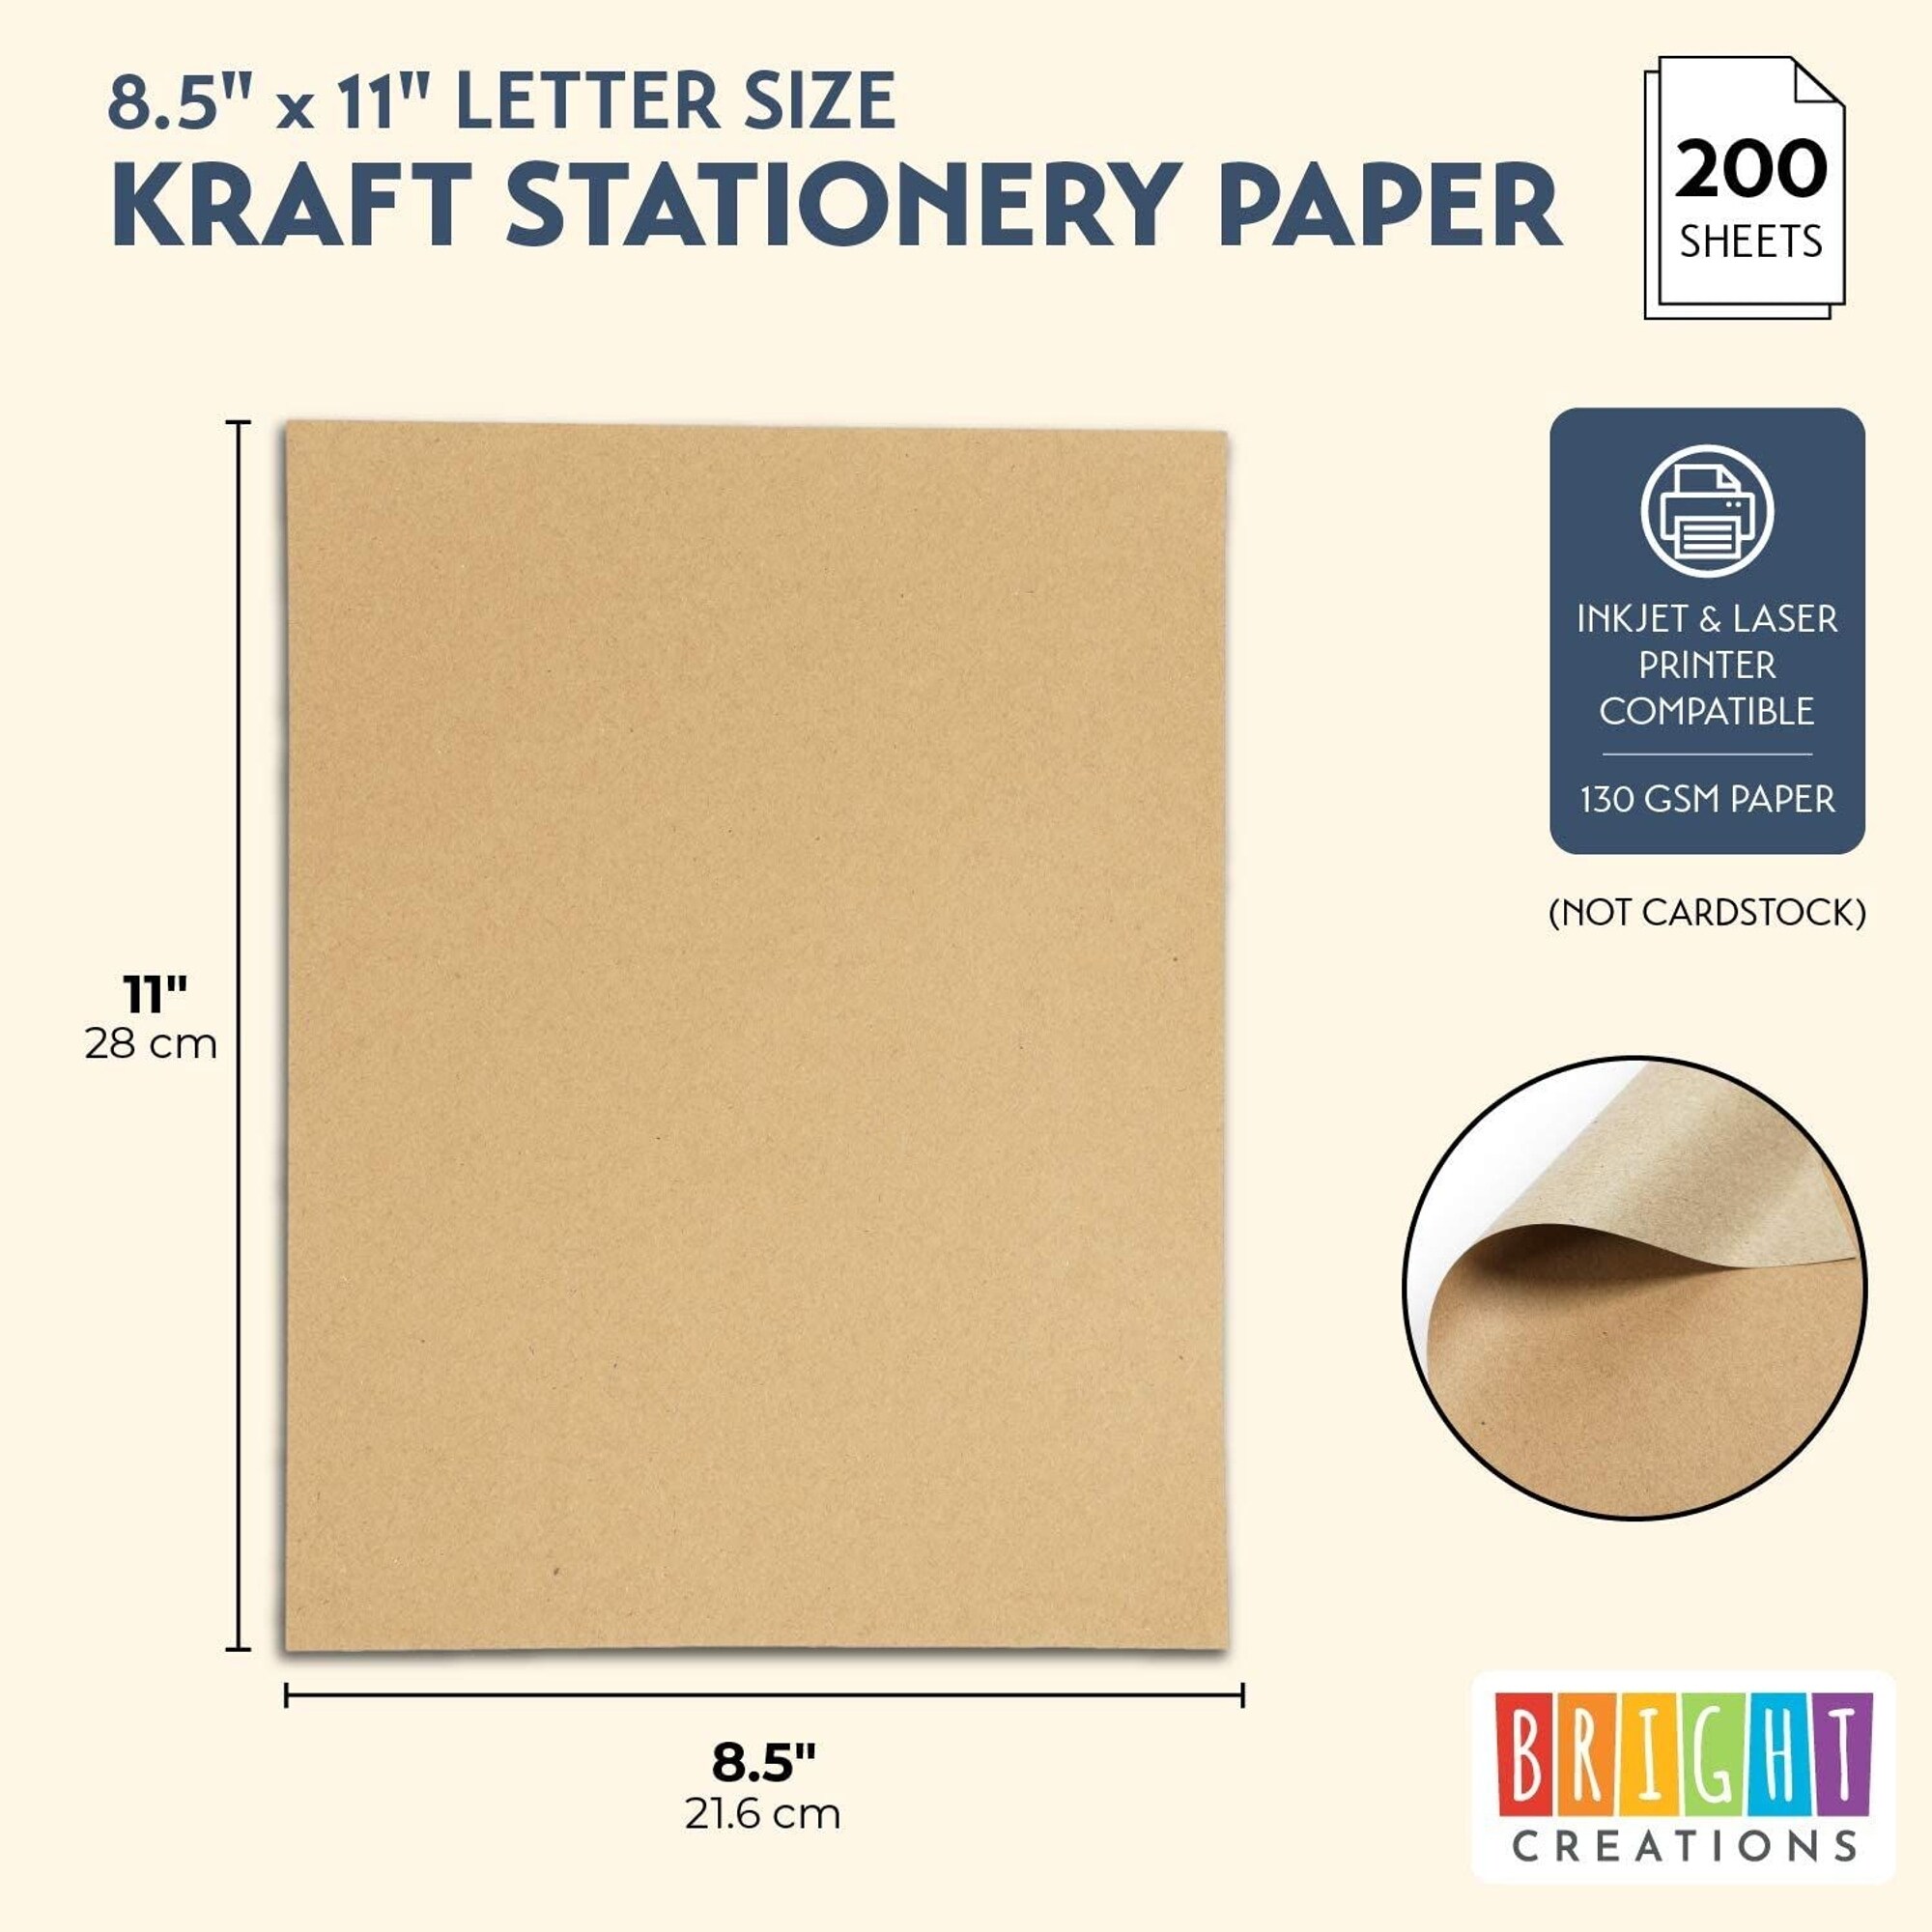 200 Pack Brown Craft Paper for DIY Projects, Classroom, Letter Size Kraft  Paper Material Sheets, 130gsm (8.5 x 11 In)